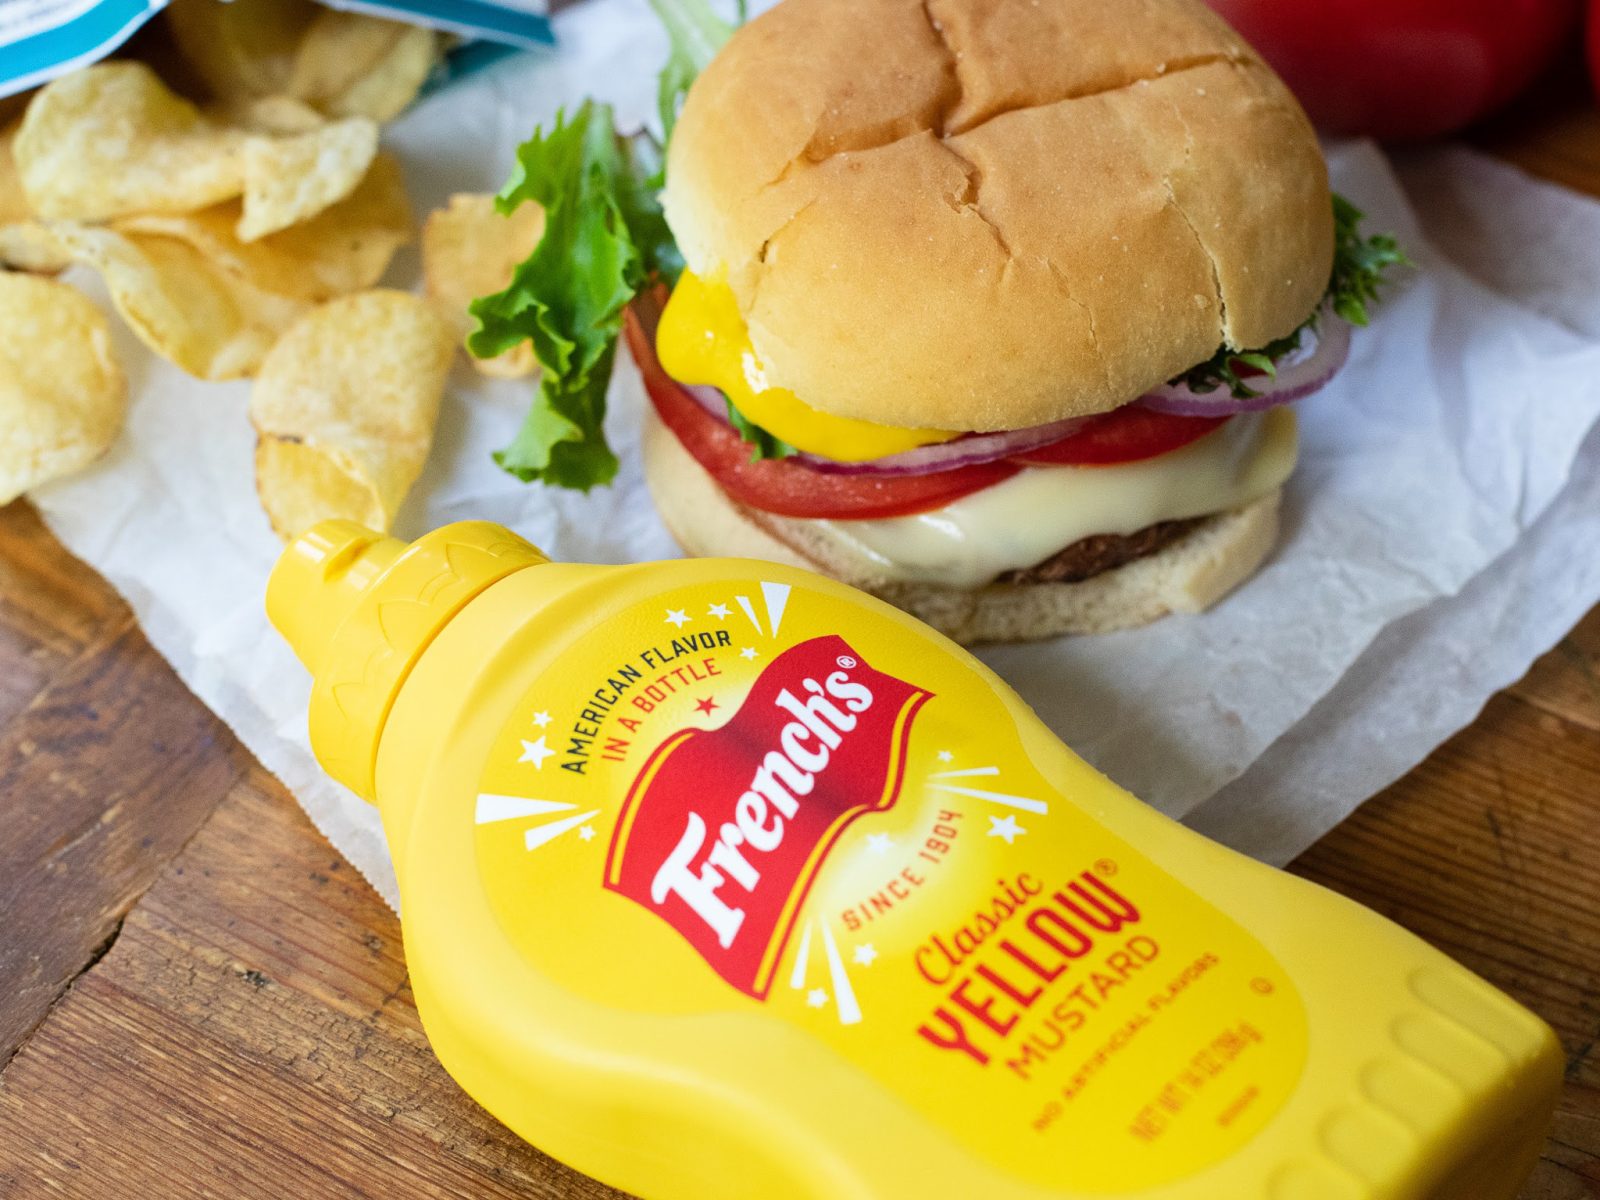 Grab The Bottles Of French’s Mustard For Just 79¢ At Kroger